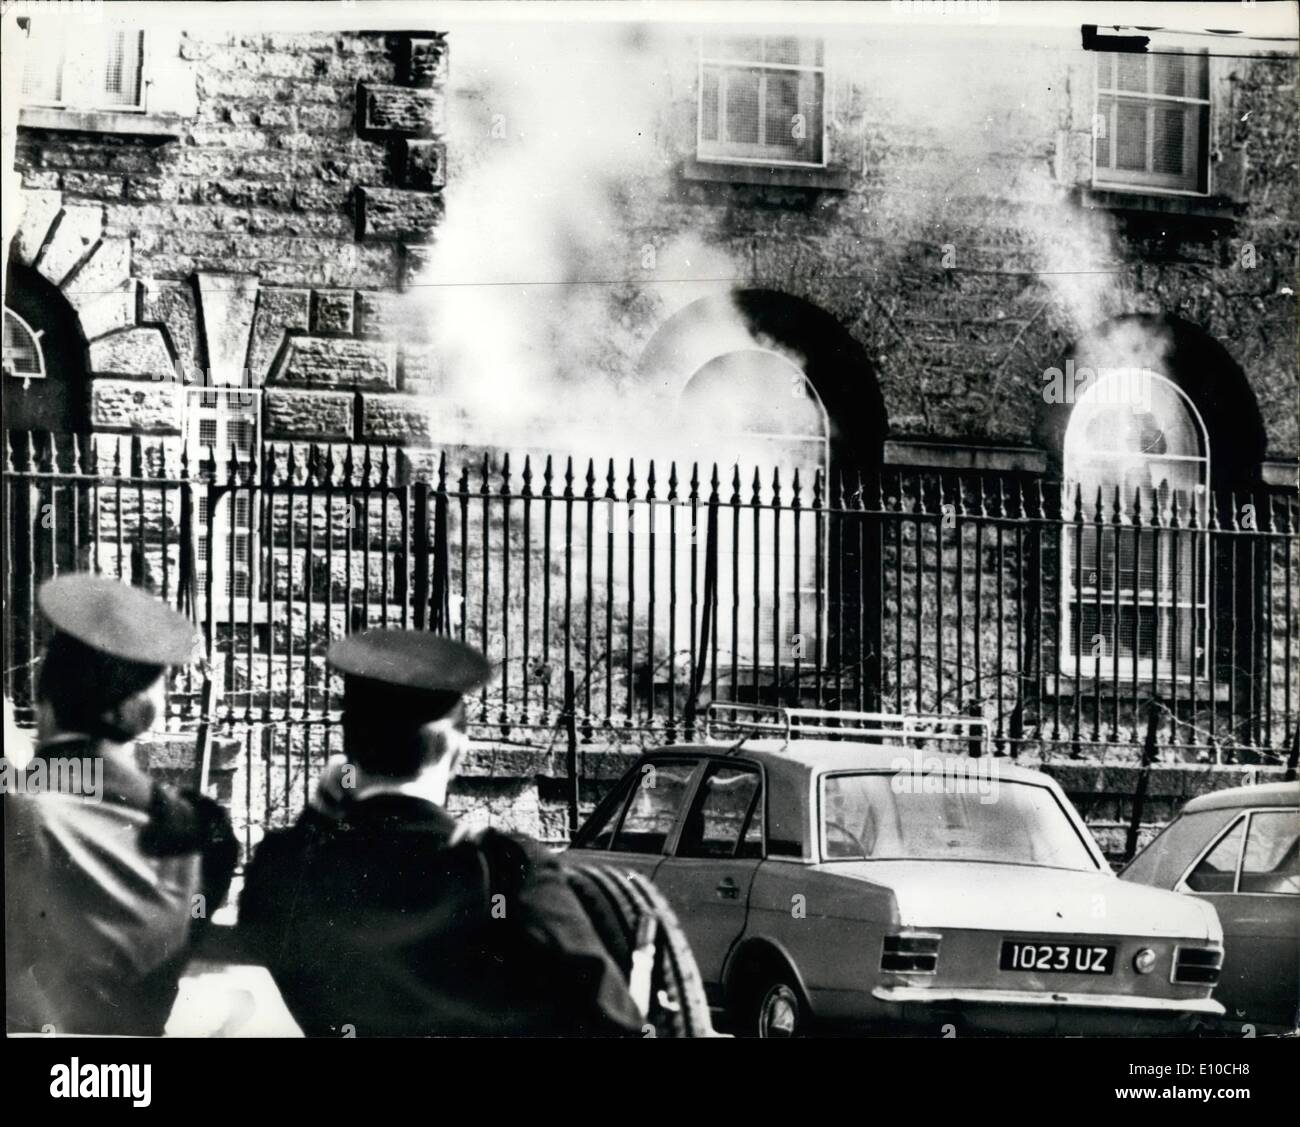 Apr. 04, 1972 - Troops storm jail to free hostages; Soldiers burst into a room in Armagh jail yesterday and overpowered 10 prisoners who had threatened to kill a policeman and two prison officers whom they were holding hostage. The prisoners, who were all on remand, had demanded to be freed and g iven safe pasage to the Eire border, eight and given safe passage tothe Eire border eight miles away. CS gas was fired through windows into the room before the troops entered Stock Photo